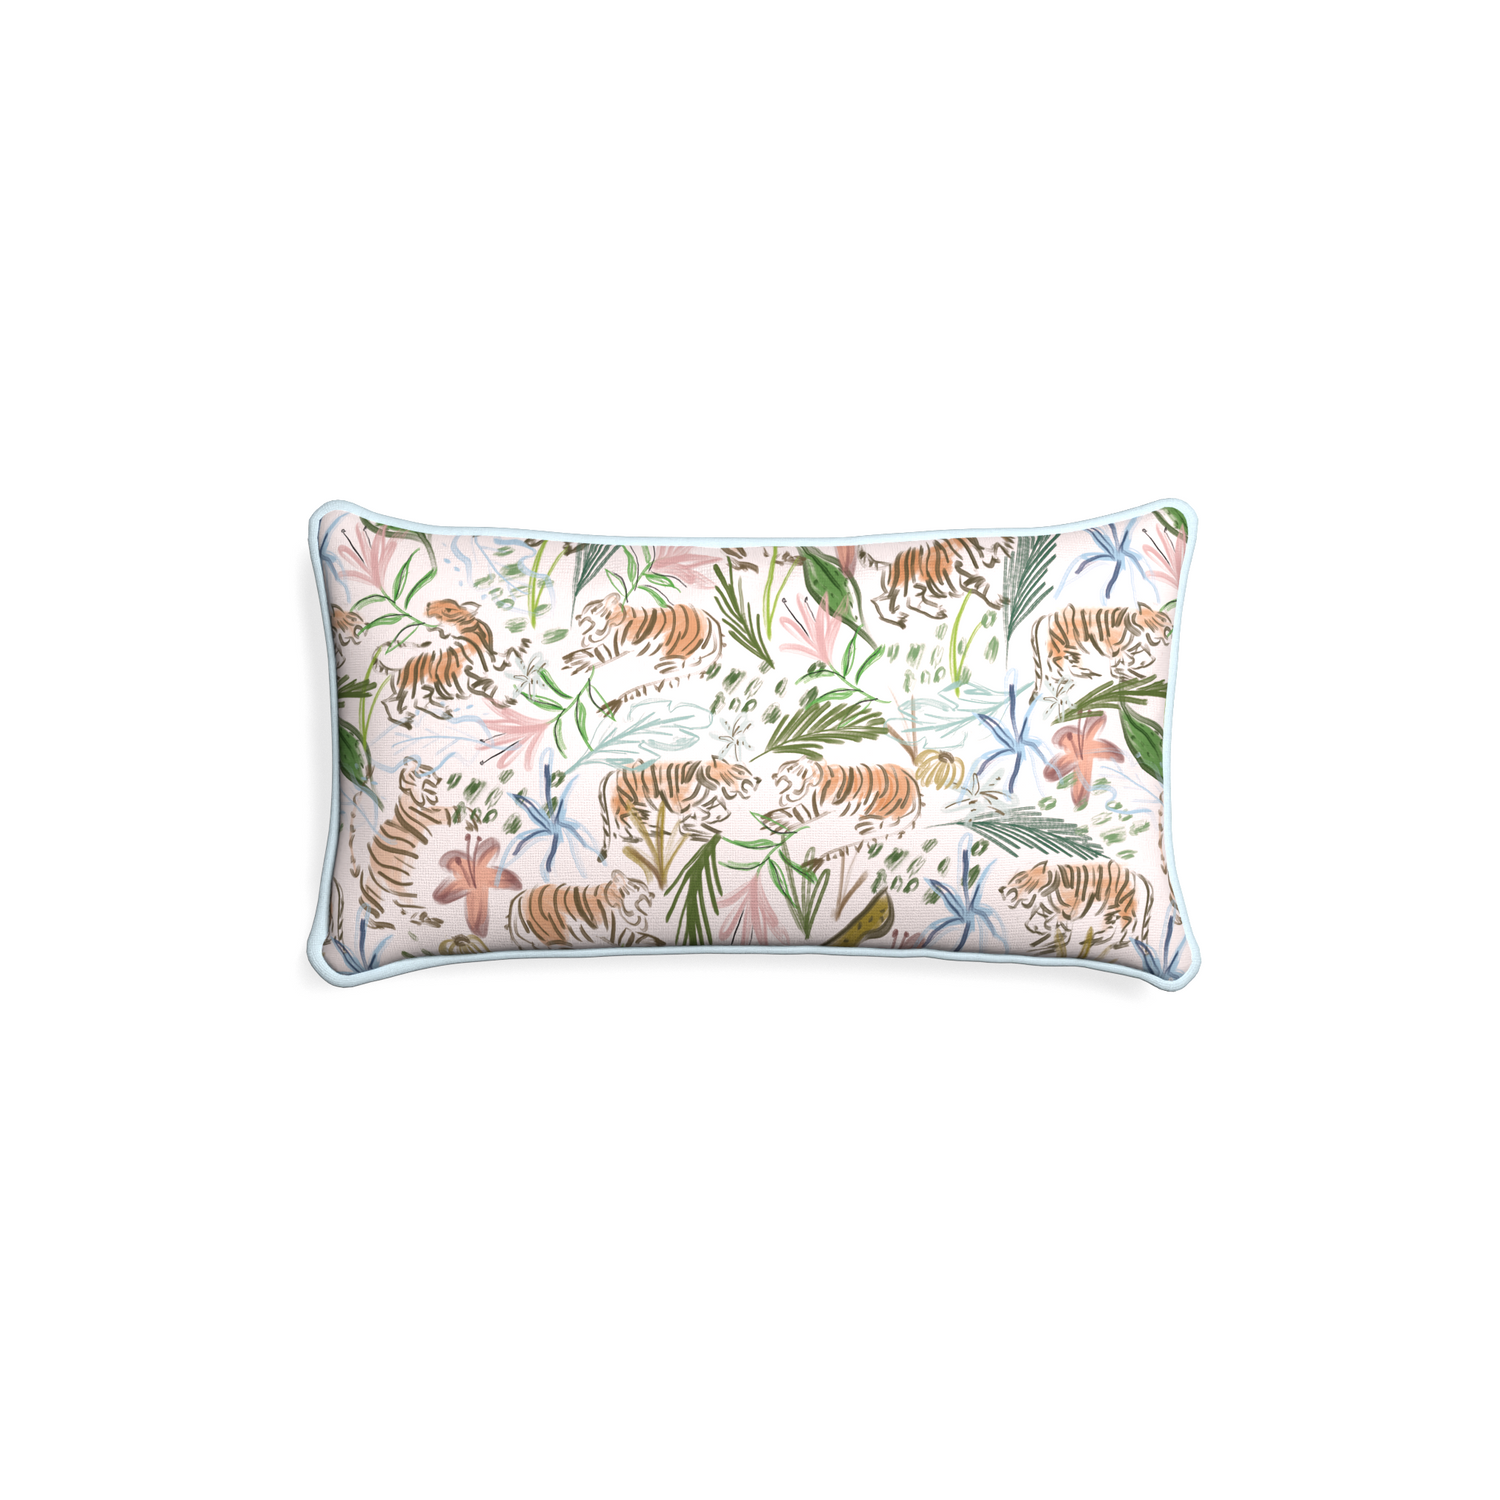 Petite-lumbar frida pink custom pink chinoiserie tigerpillow with powder piping on white background